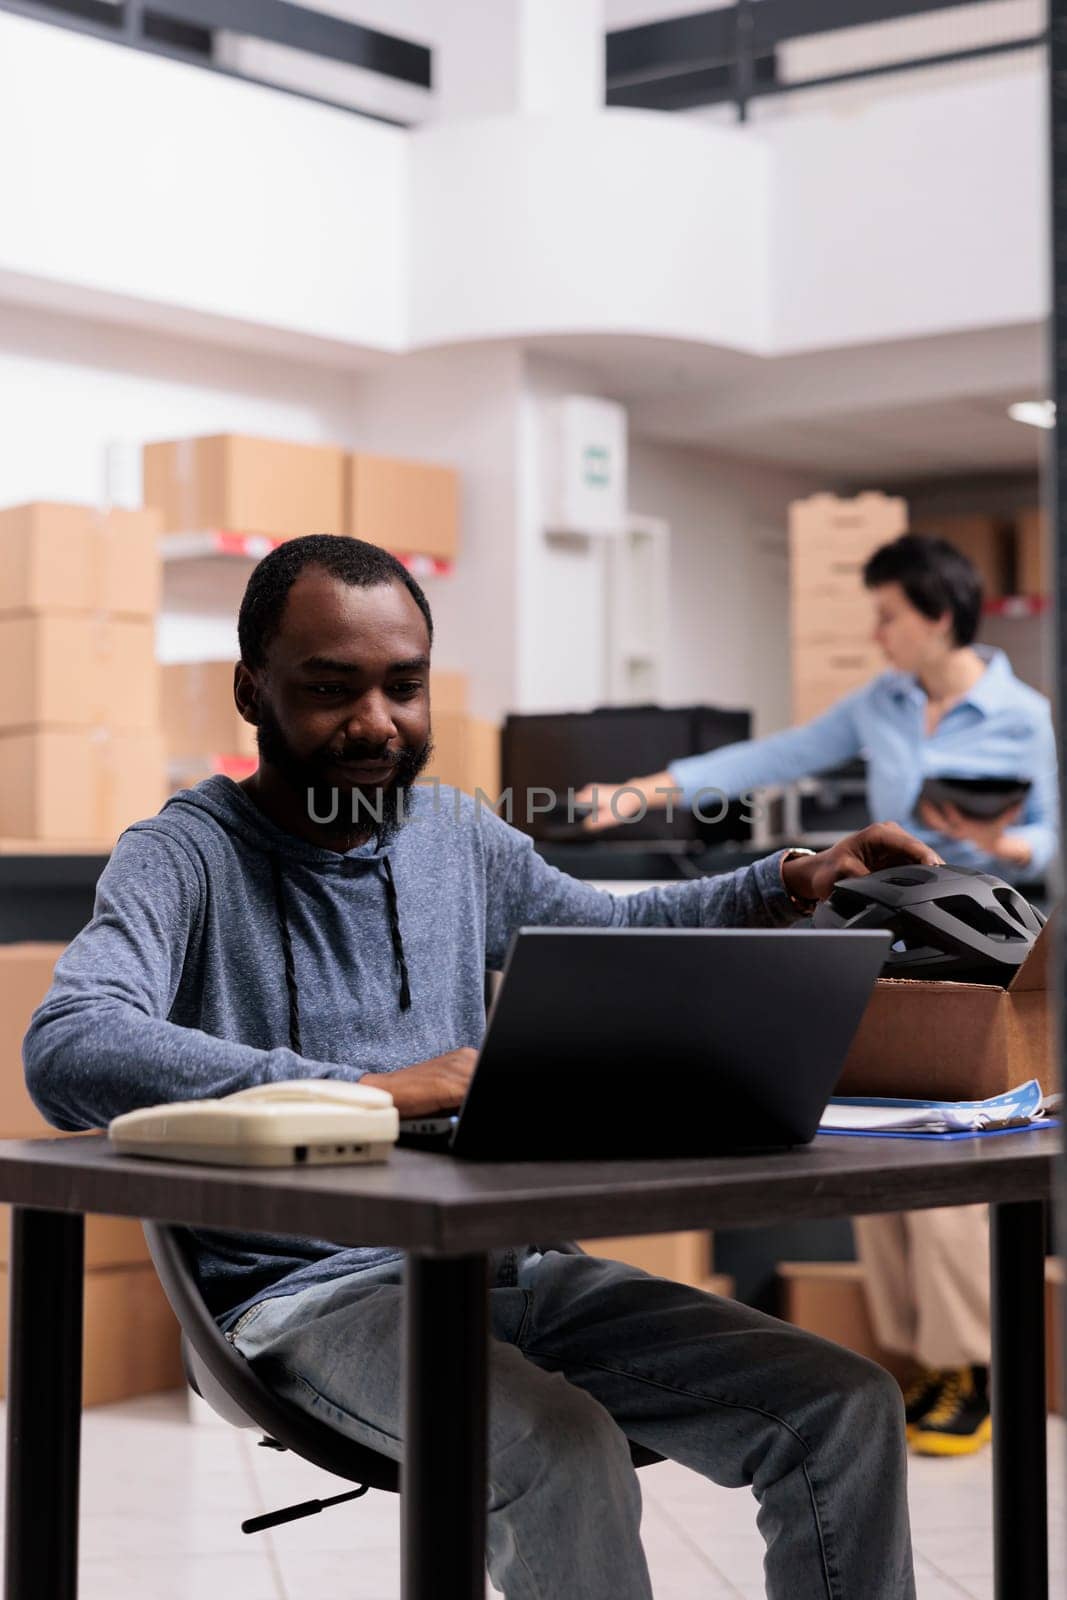 Storehouse supervisor sitting at desk table in warehouse checking online order preparing packages before shipping to customer, working with carboard box. Concept of distribution center